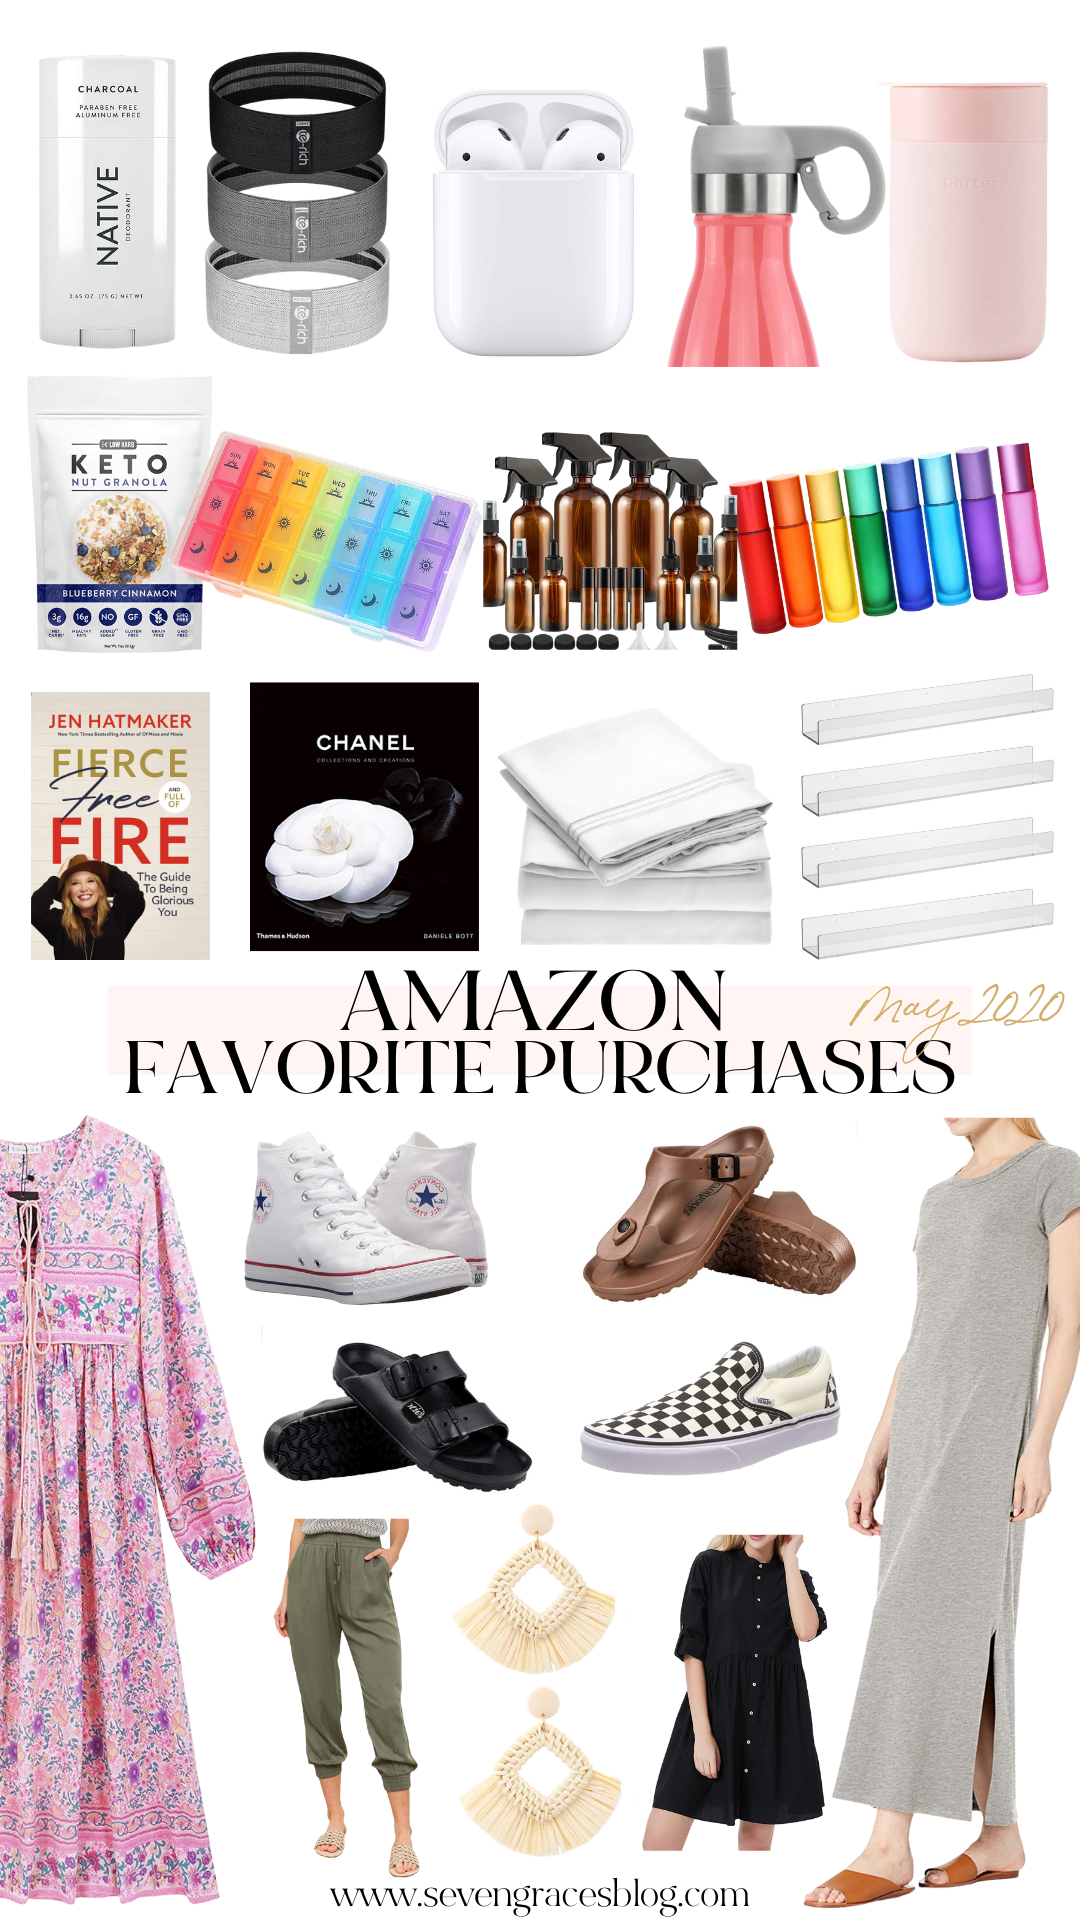 The latest and greatest Amazon purchases from May. Fashion, food, household goods, and more.